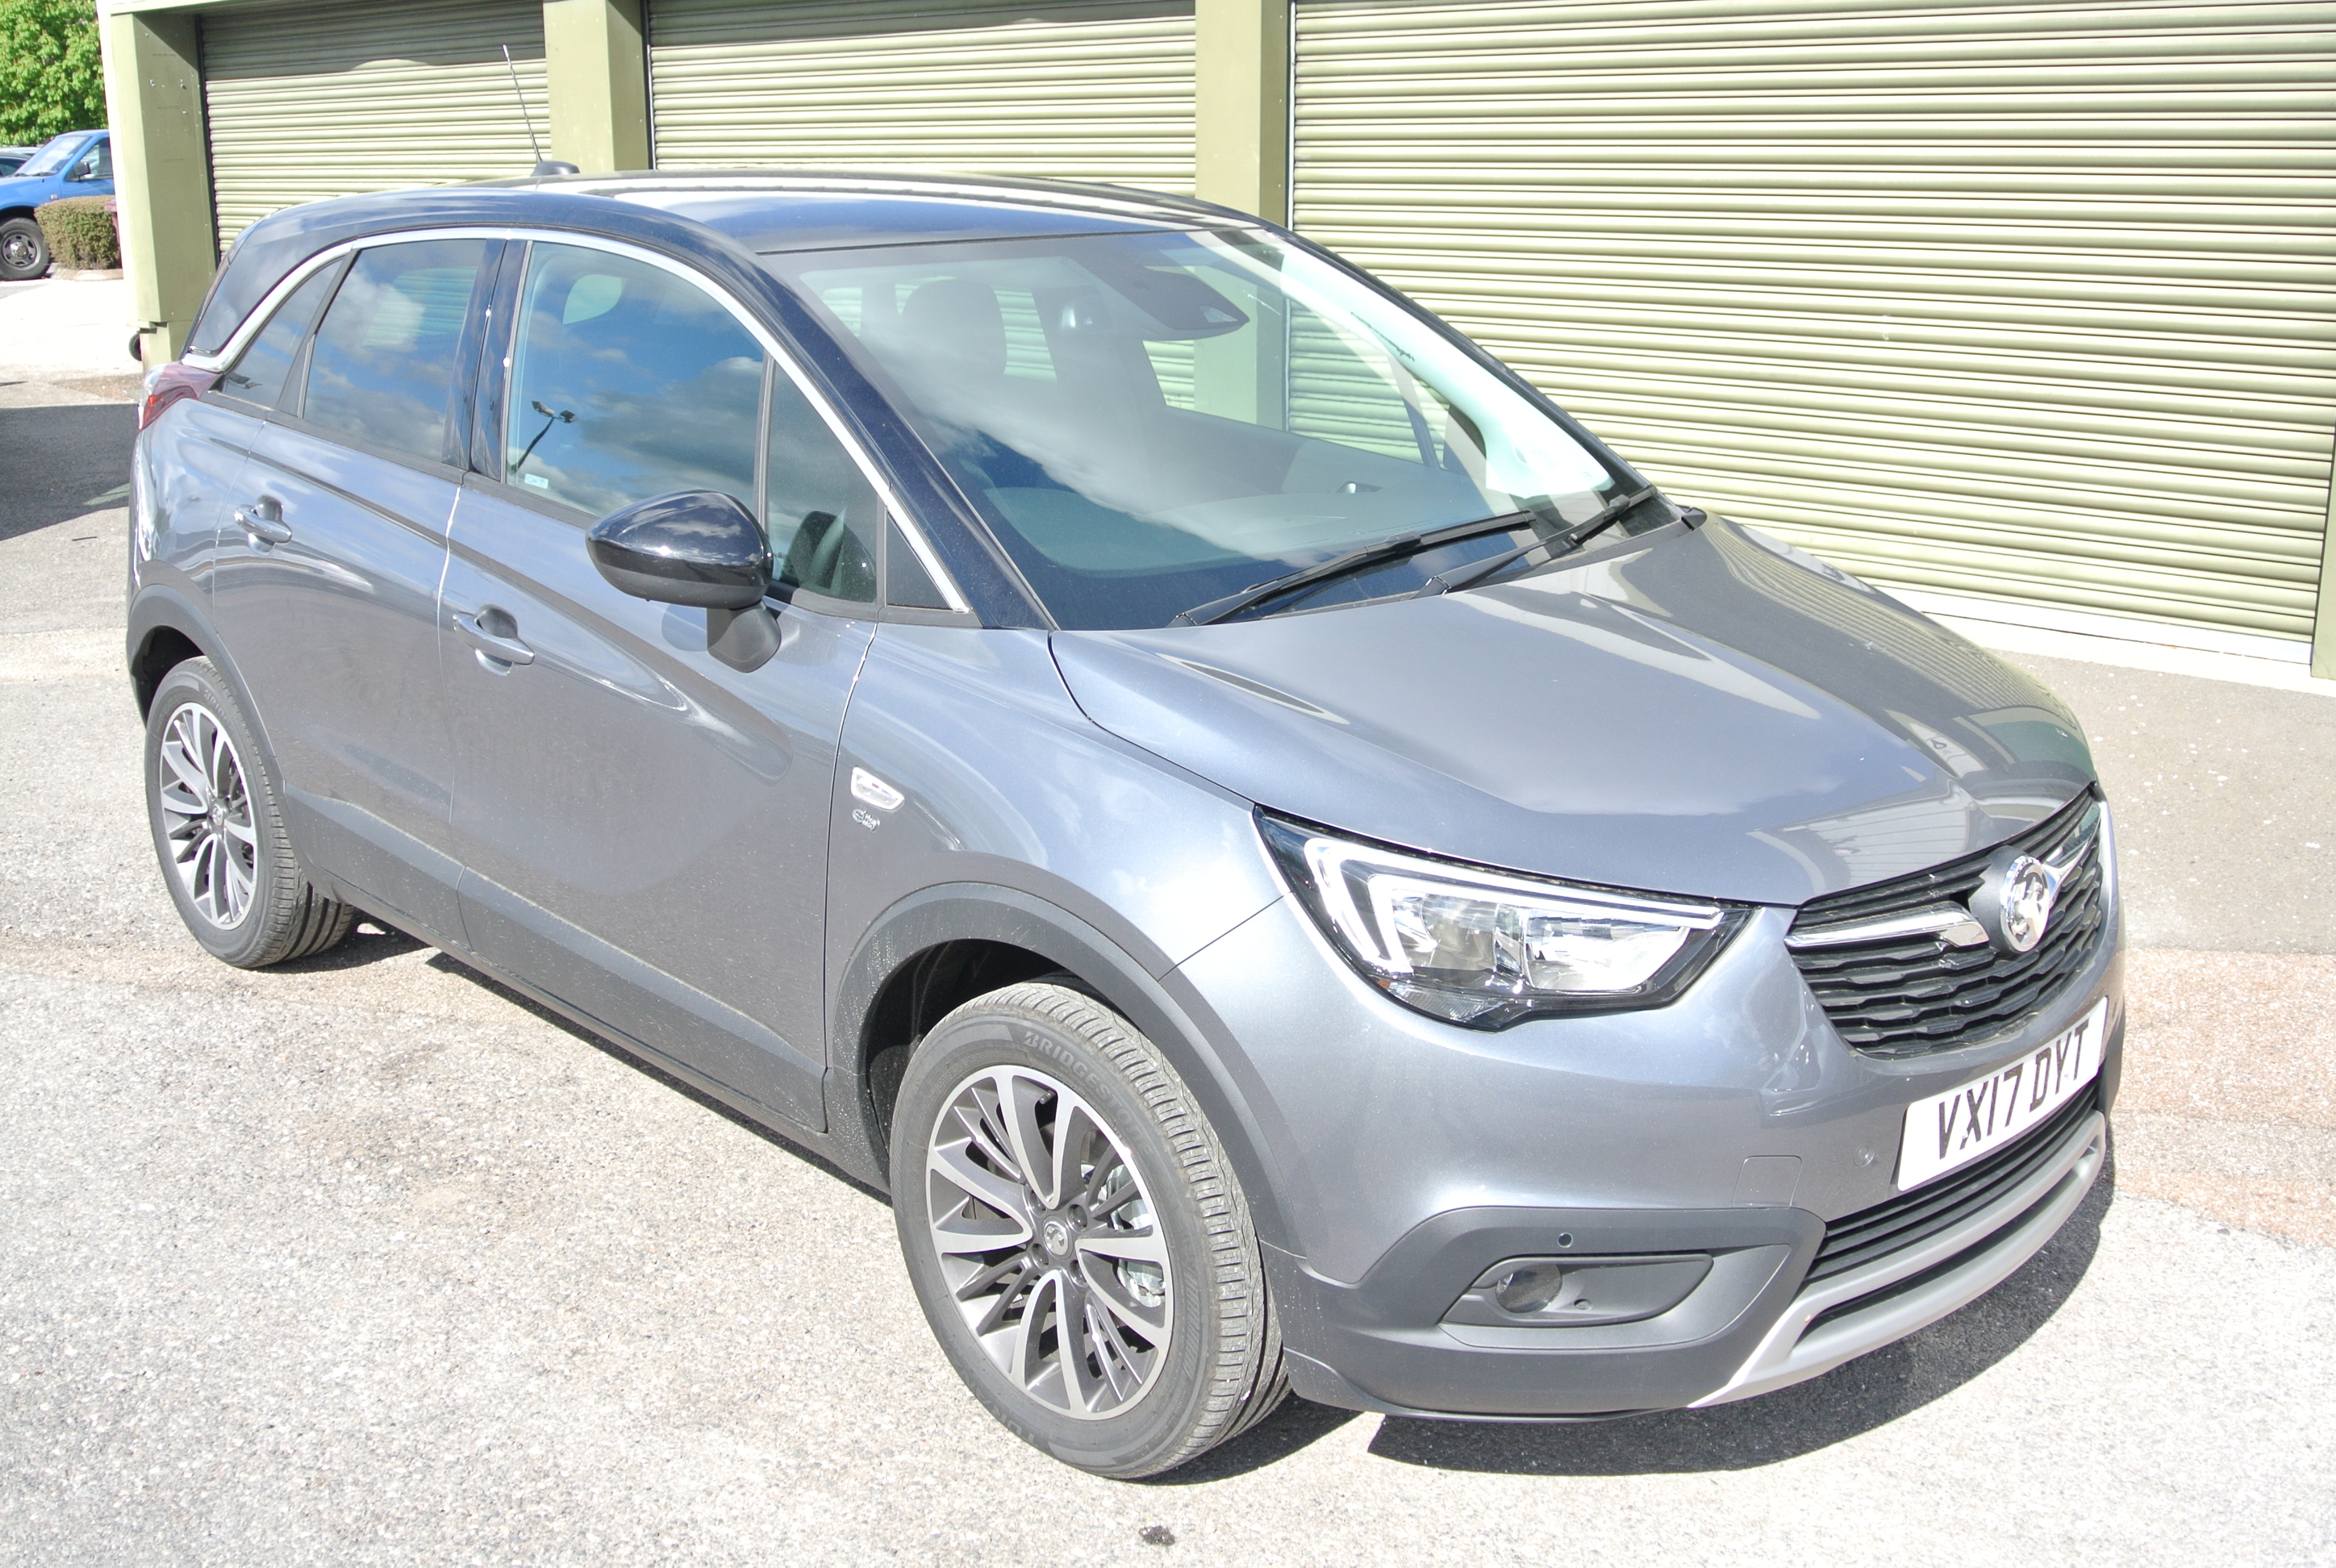 Striking a balance between GM and PSA is the all-new Crossland X